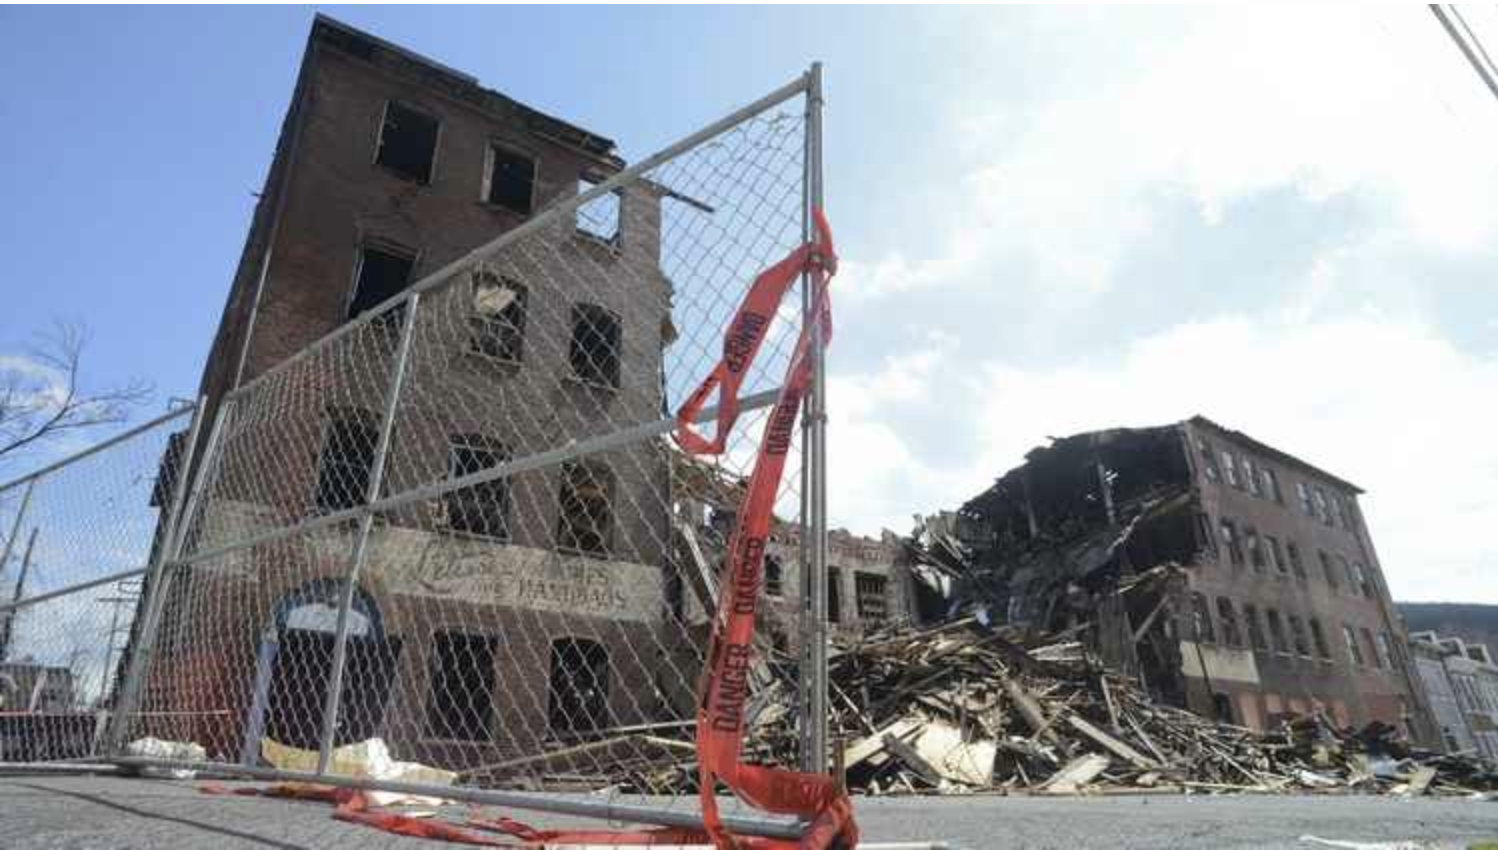 A fence is surrounding a building that is being demolished.